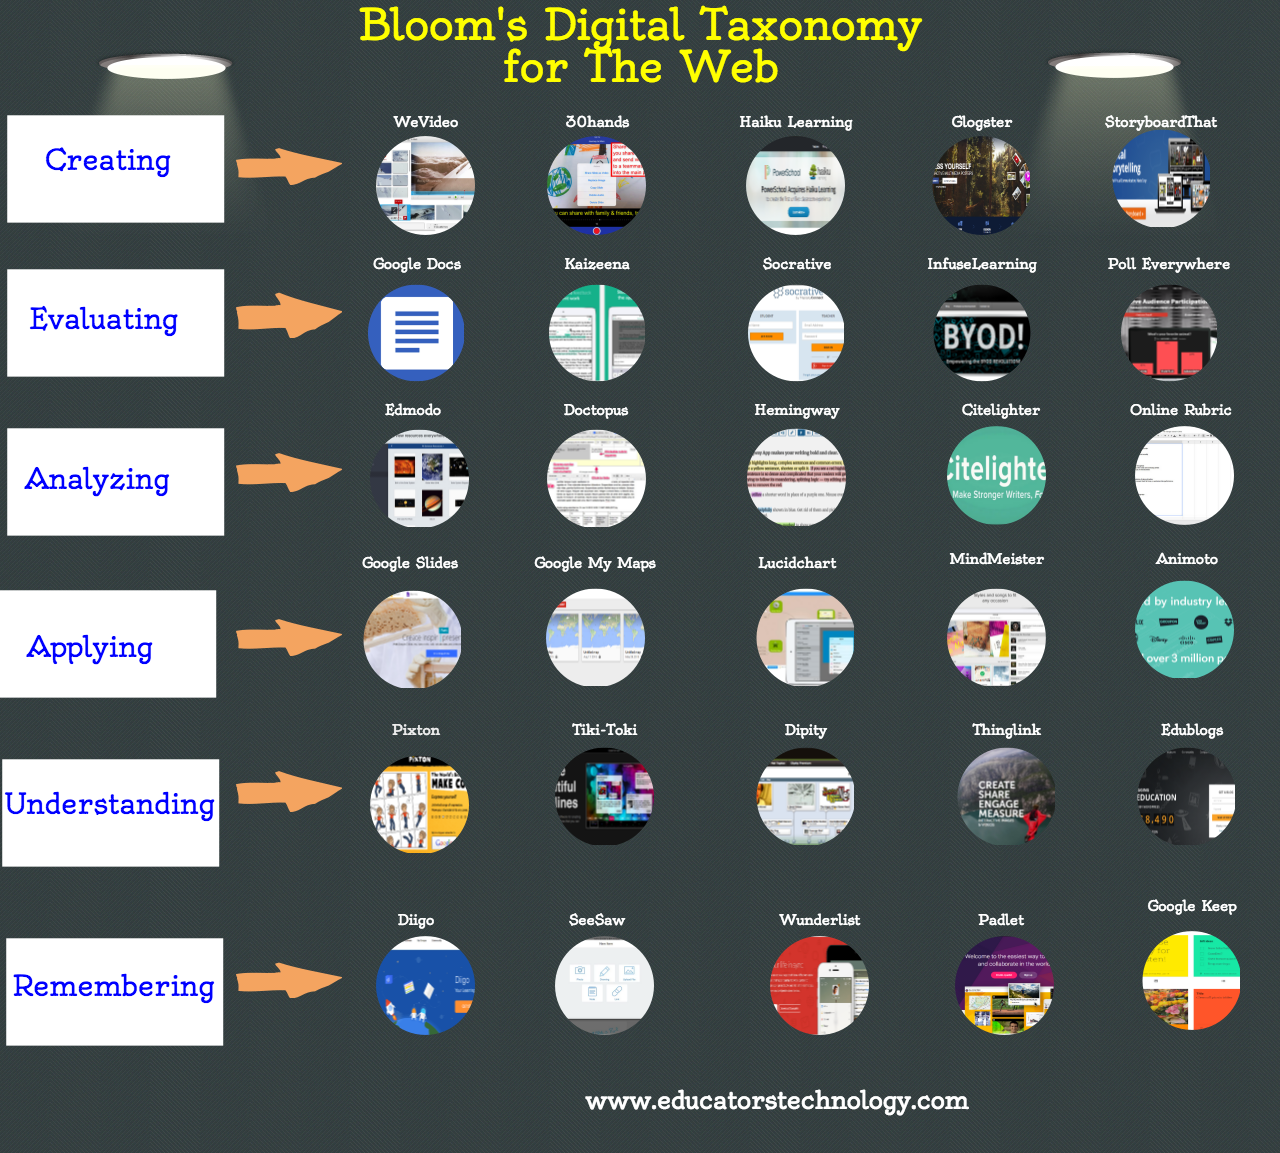 Bloom's Digital Taxonomy for The Web